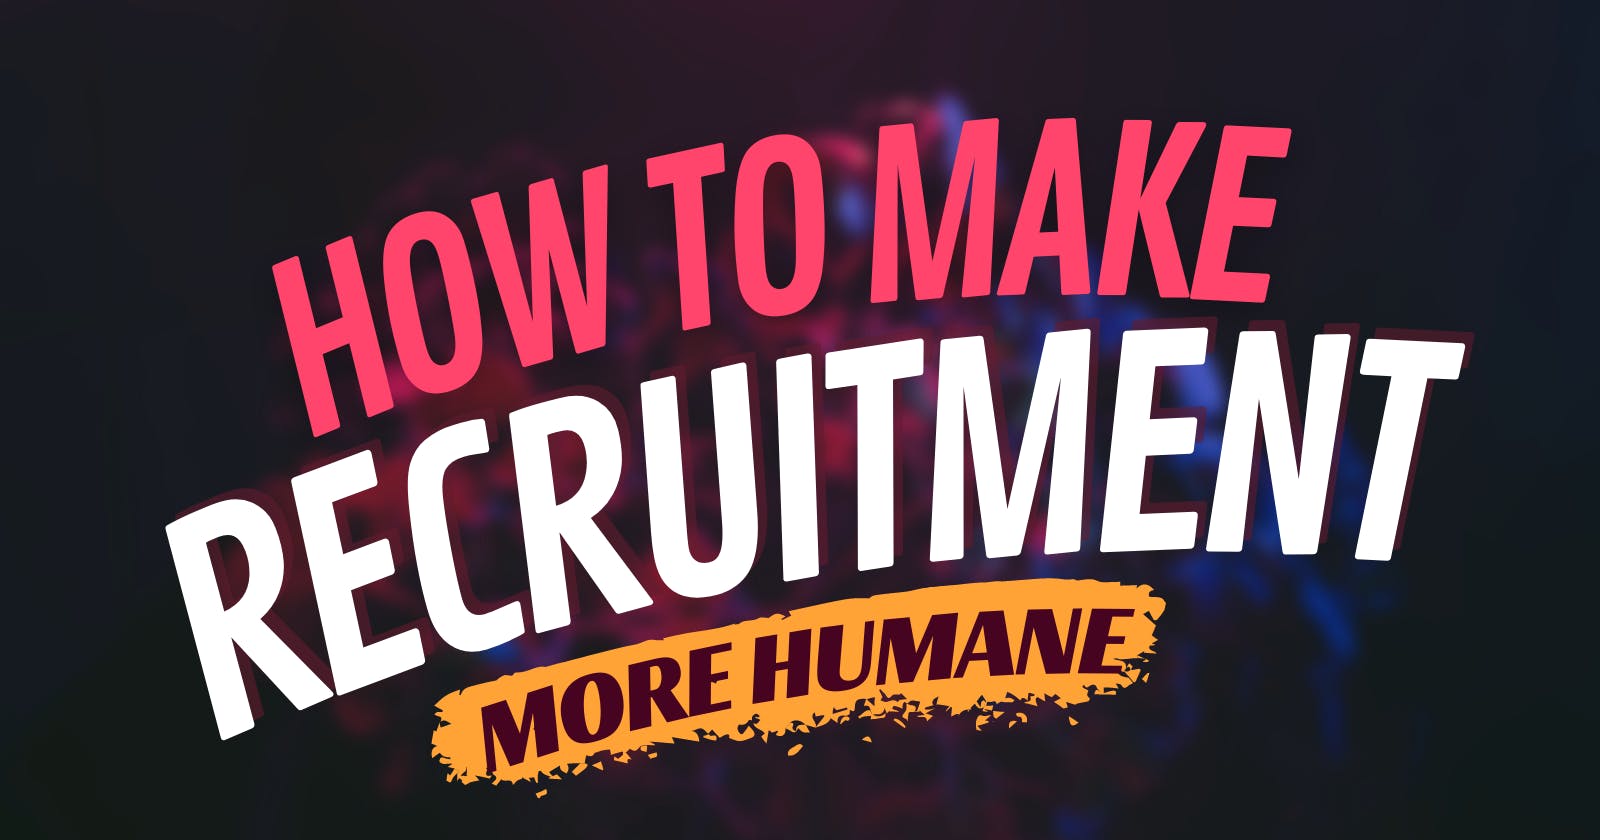 How to make the Recruitment process "more humane"